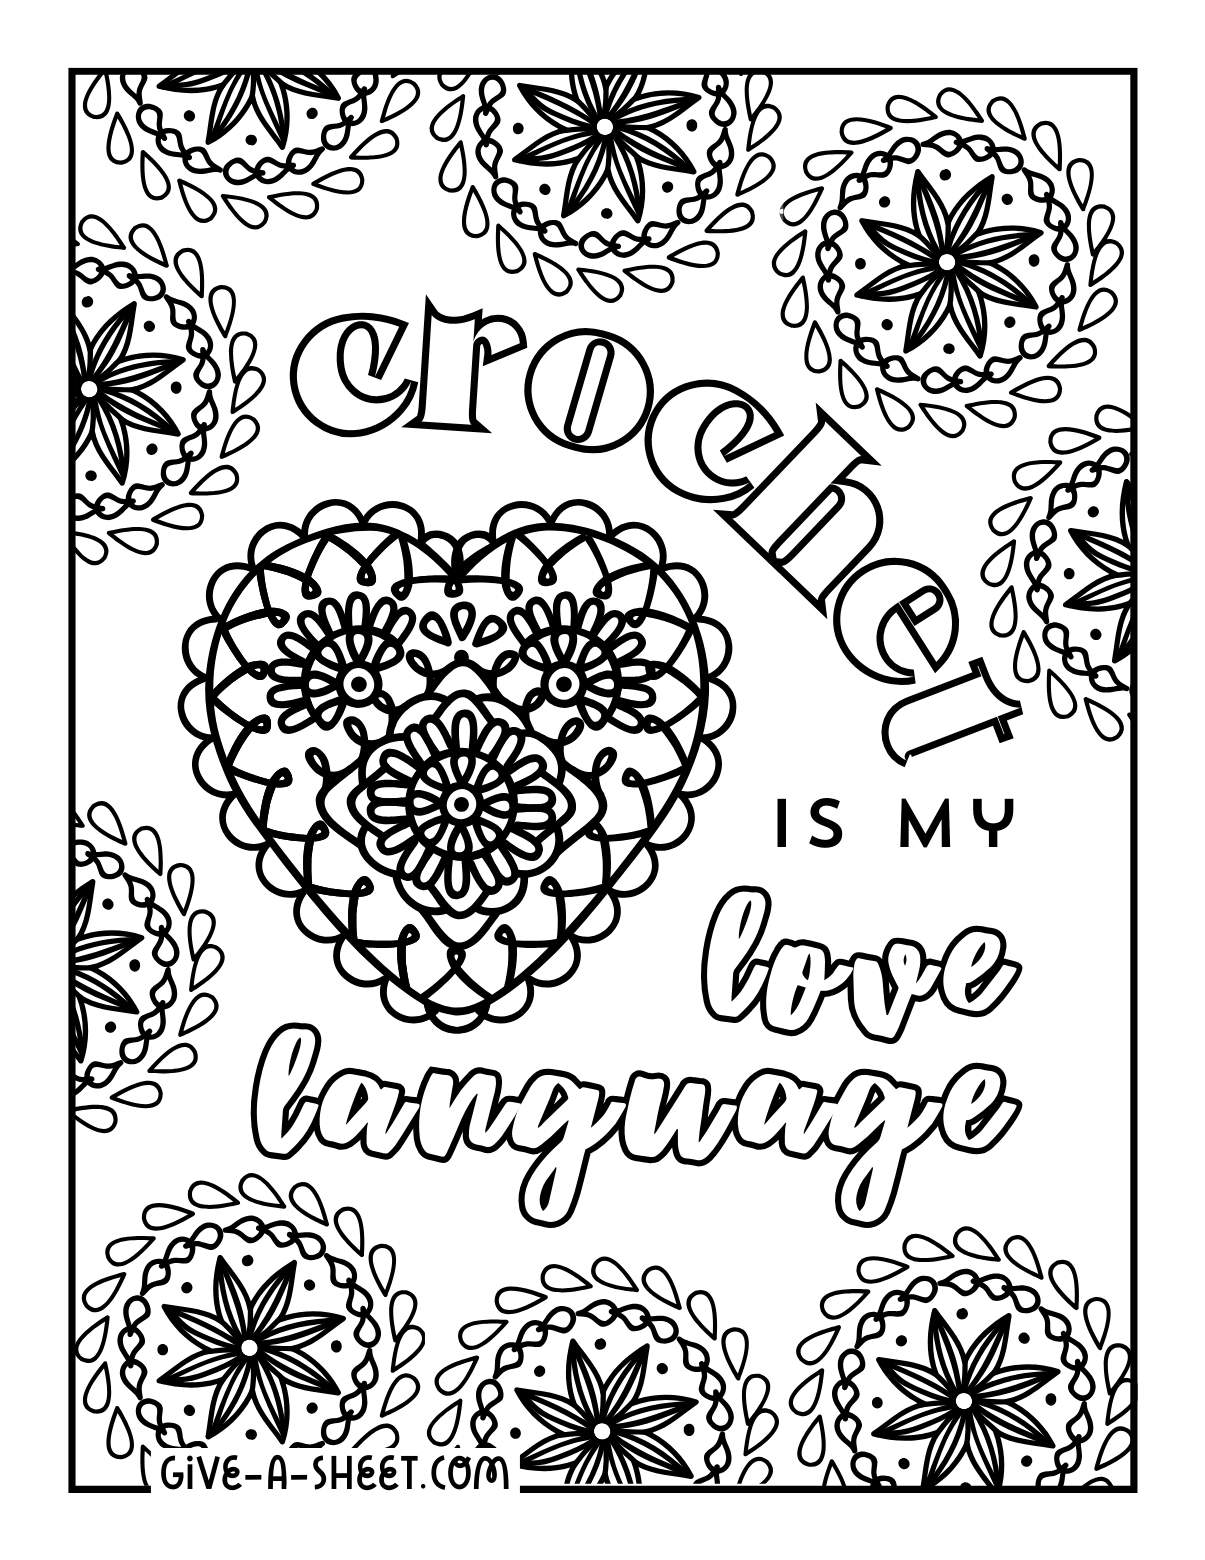 Crochet lace doily patterns coloring page.